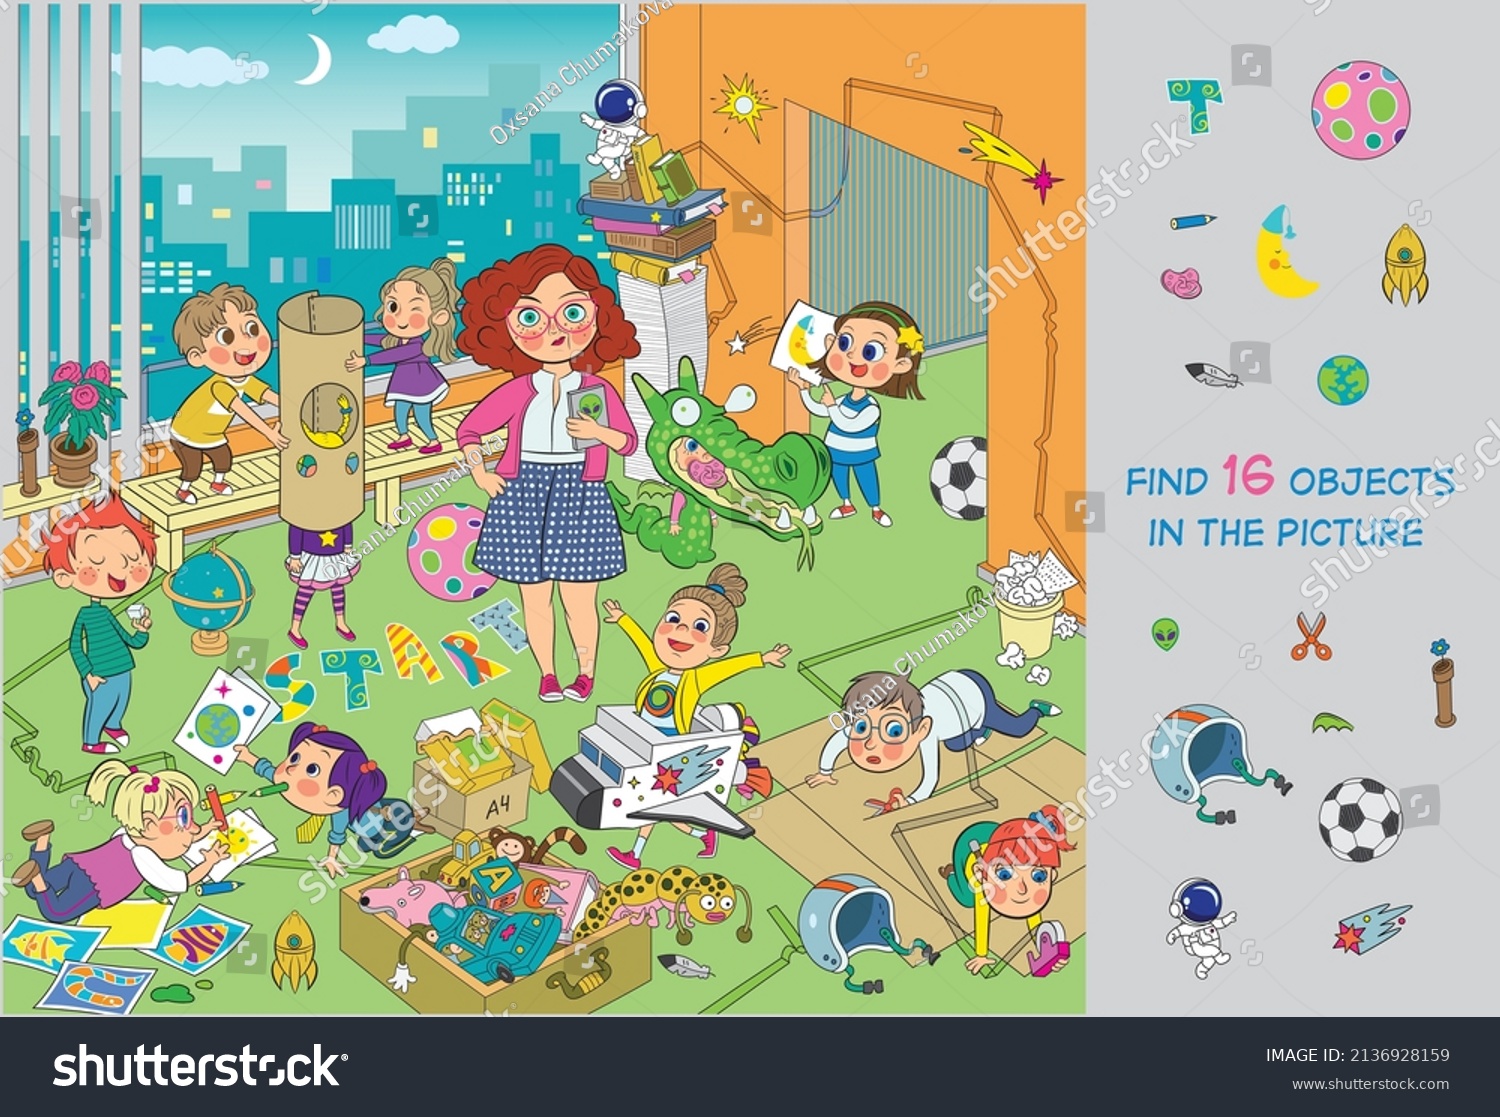 Children's games as astronauts. Children design, invent, draw, play, dream about flying into space. Vector illustration. Find 16 objects in the picture. Funny cartoon characters.  #2136928159